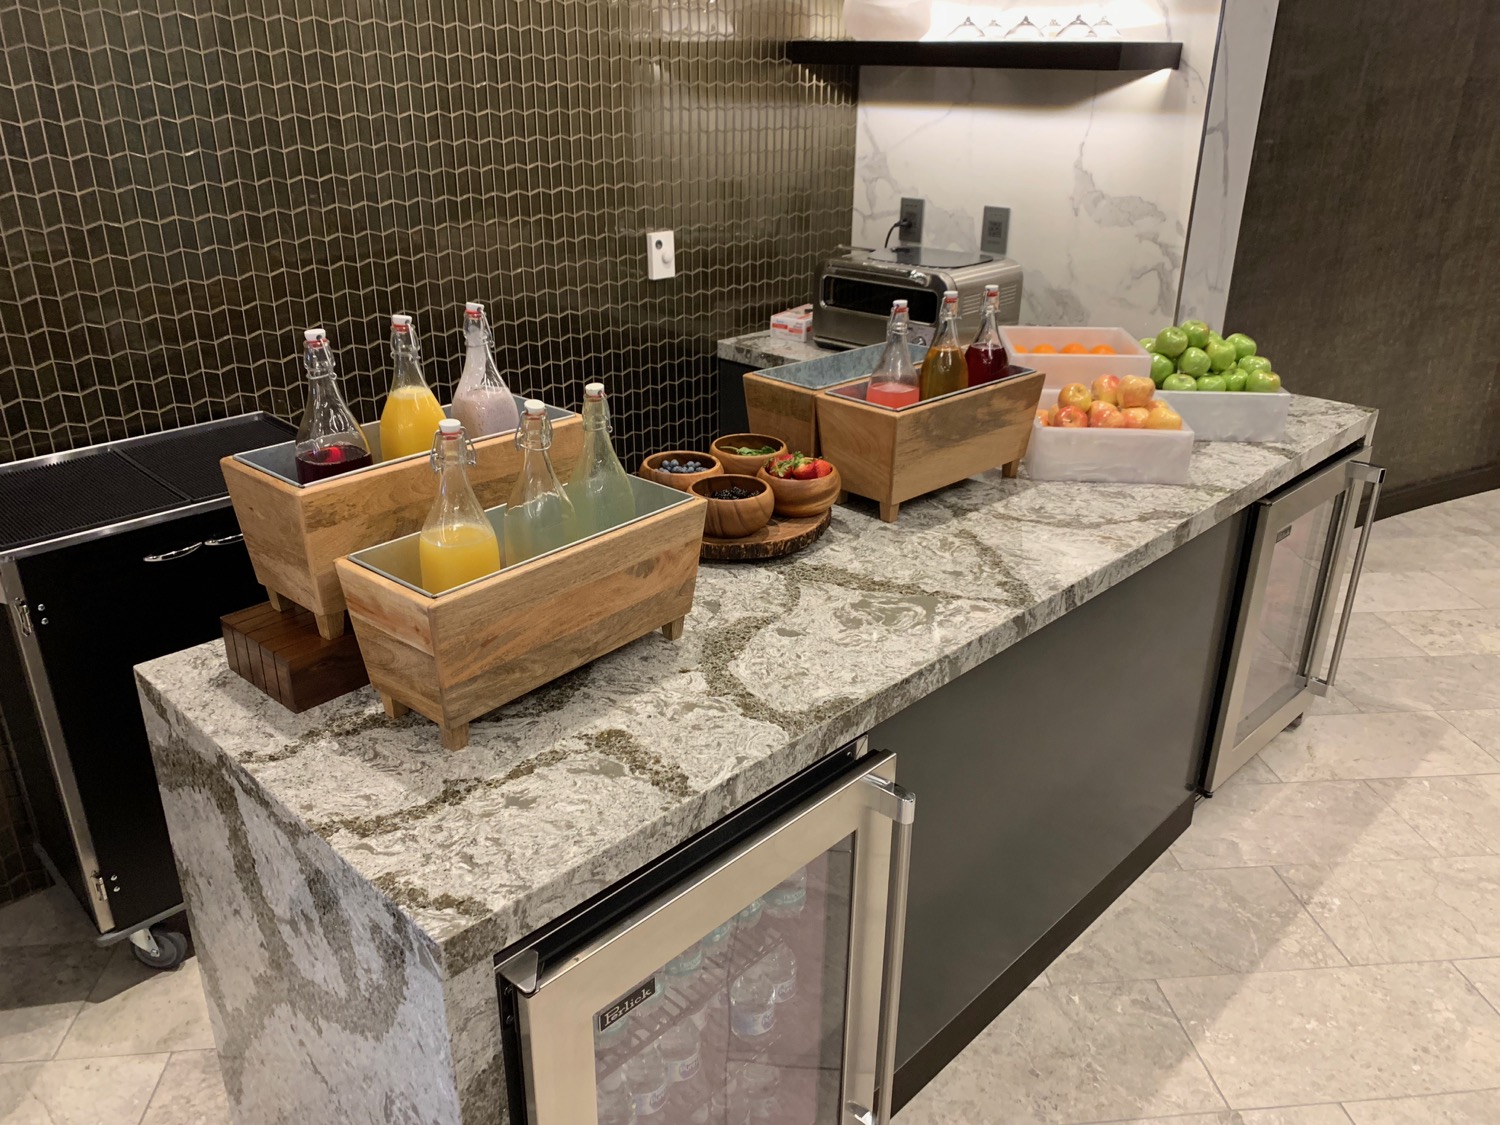 a counter with fruit and juice in containers